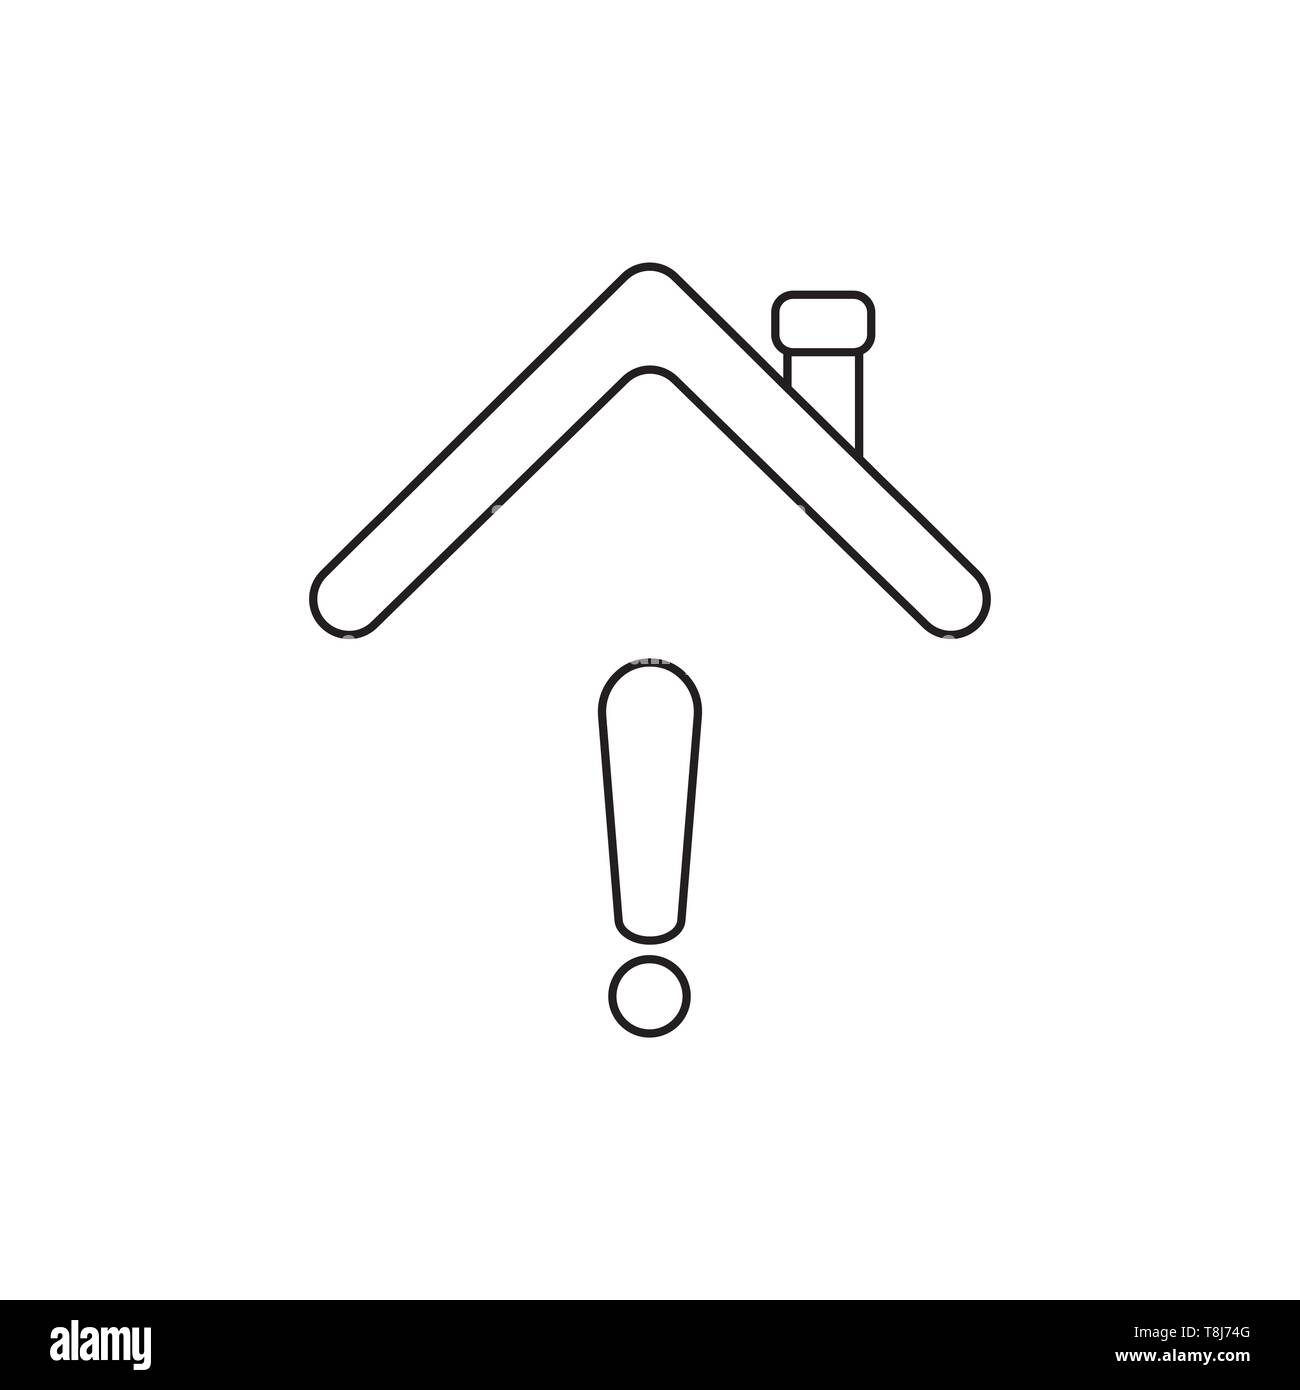 Vector icon concept of exclamation mark under house roof. Black outlines. Stock Vector